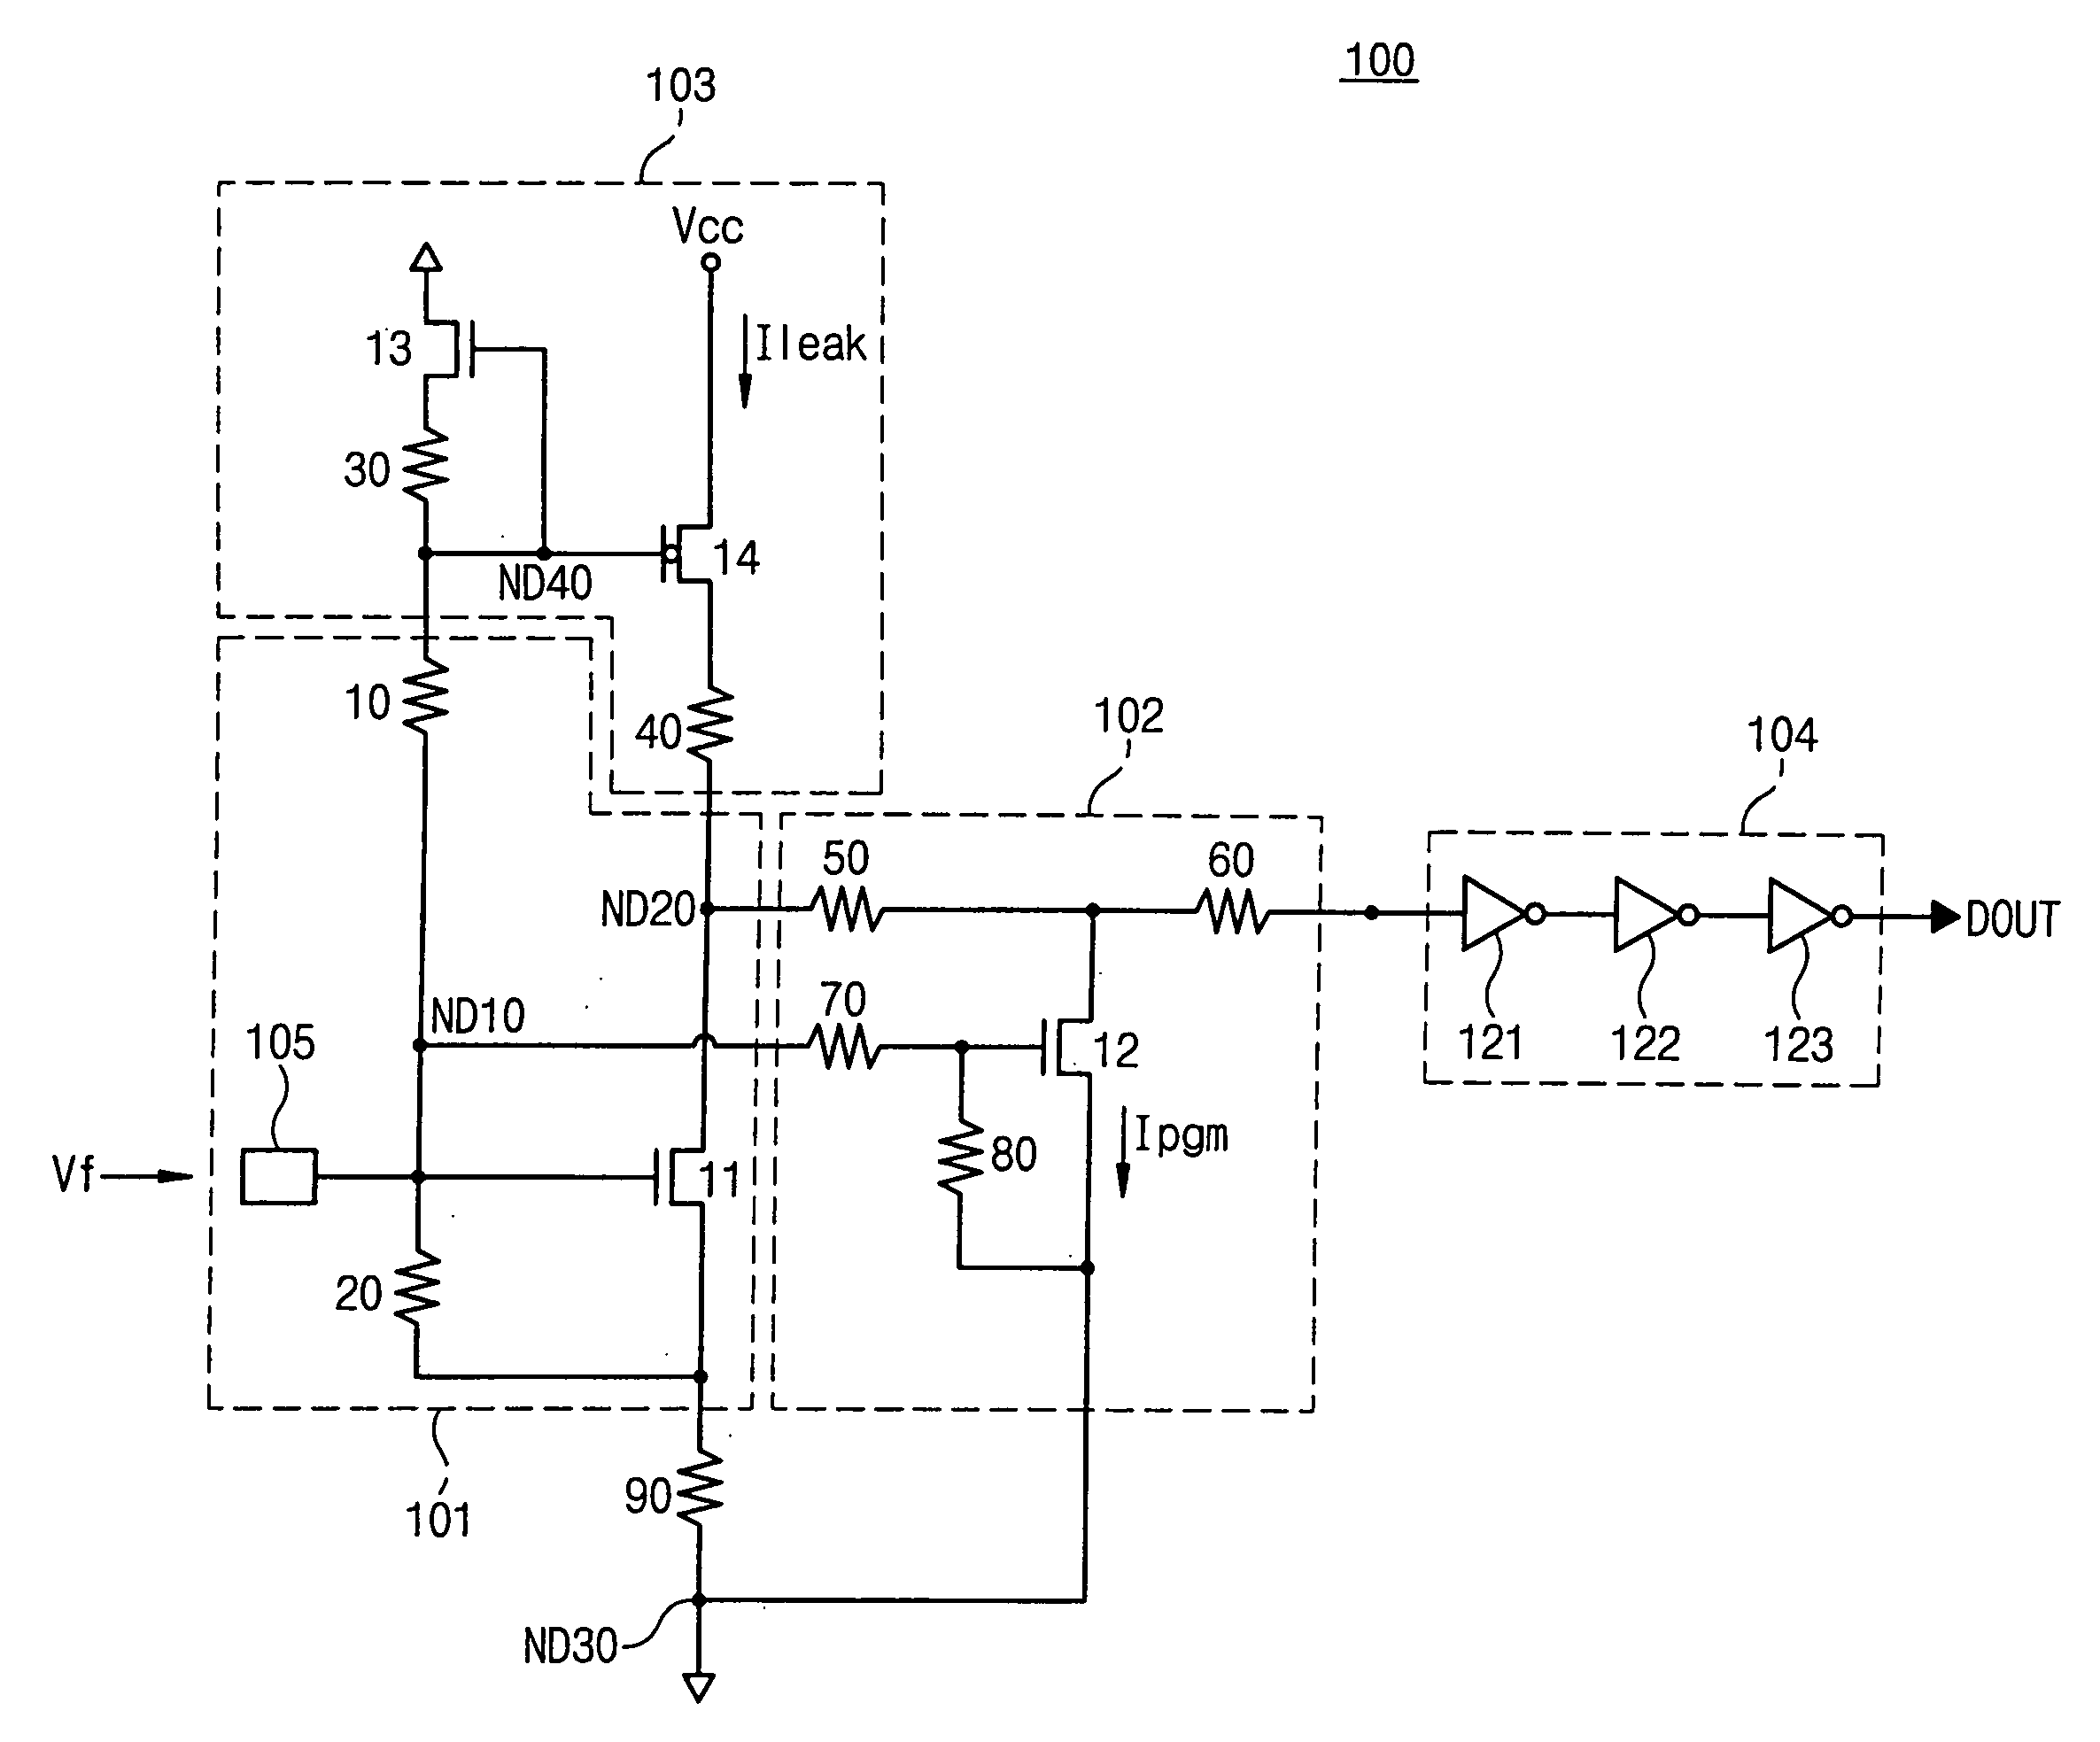 E-fuse circuit using leakage current path of transistor